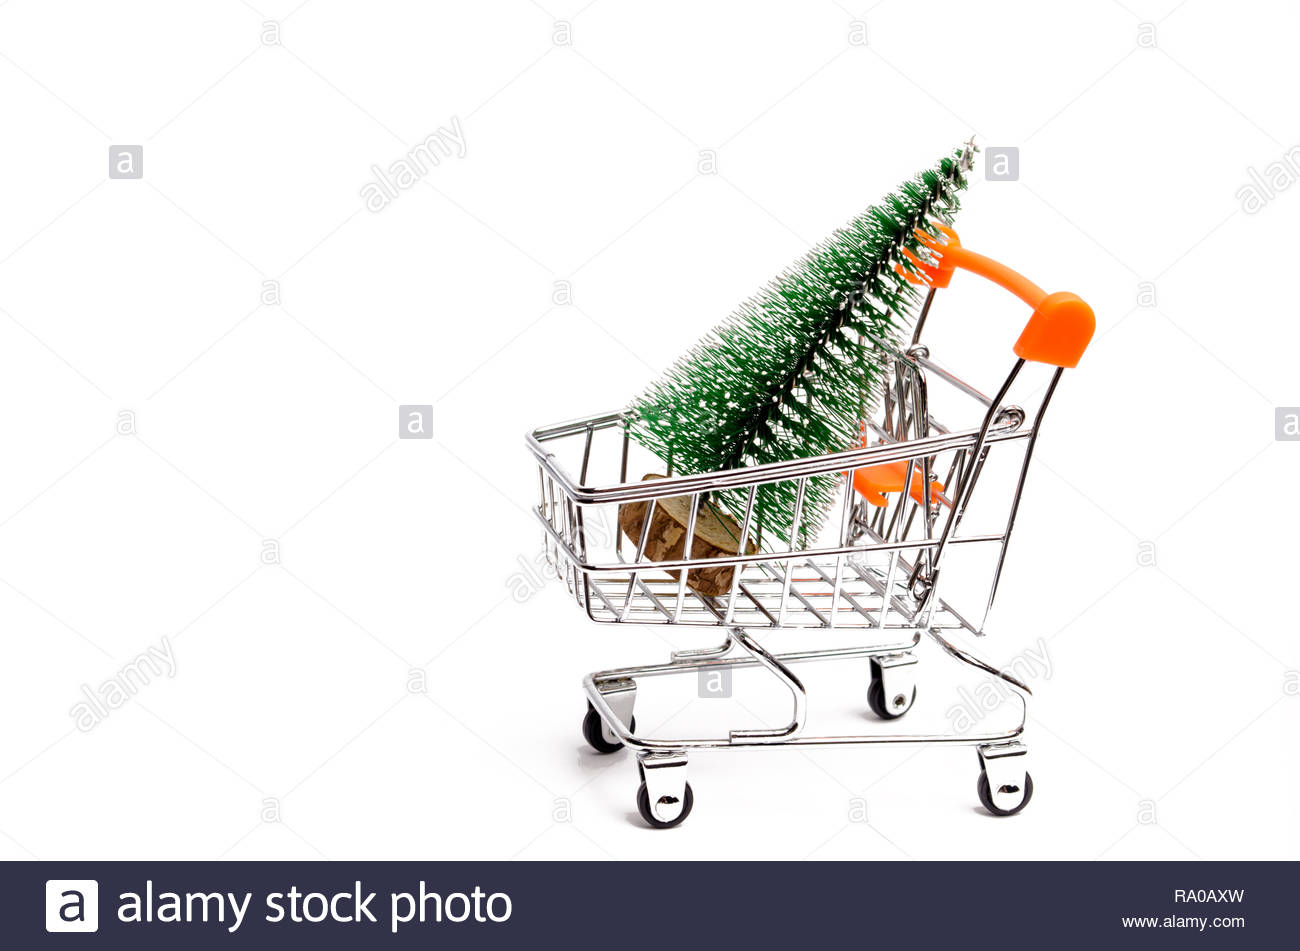 Christmas Tree In A Supermarket Trolley On An Isolated White